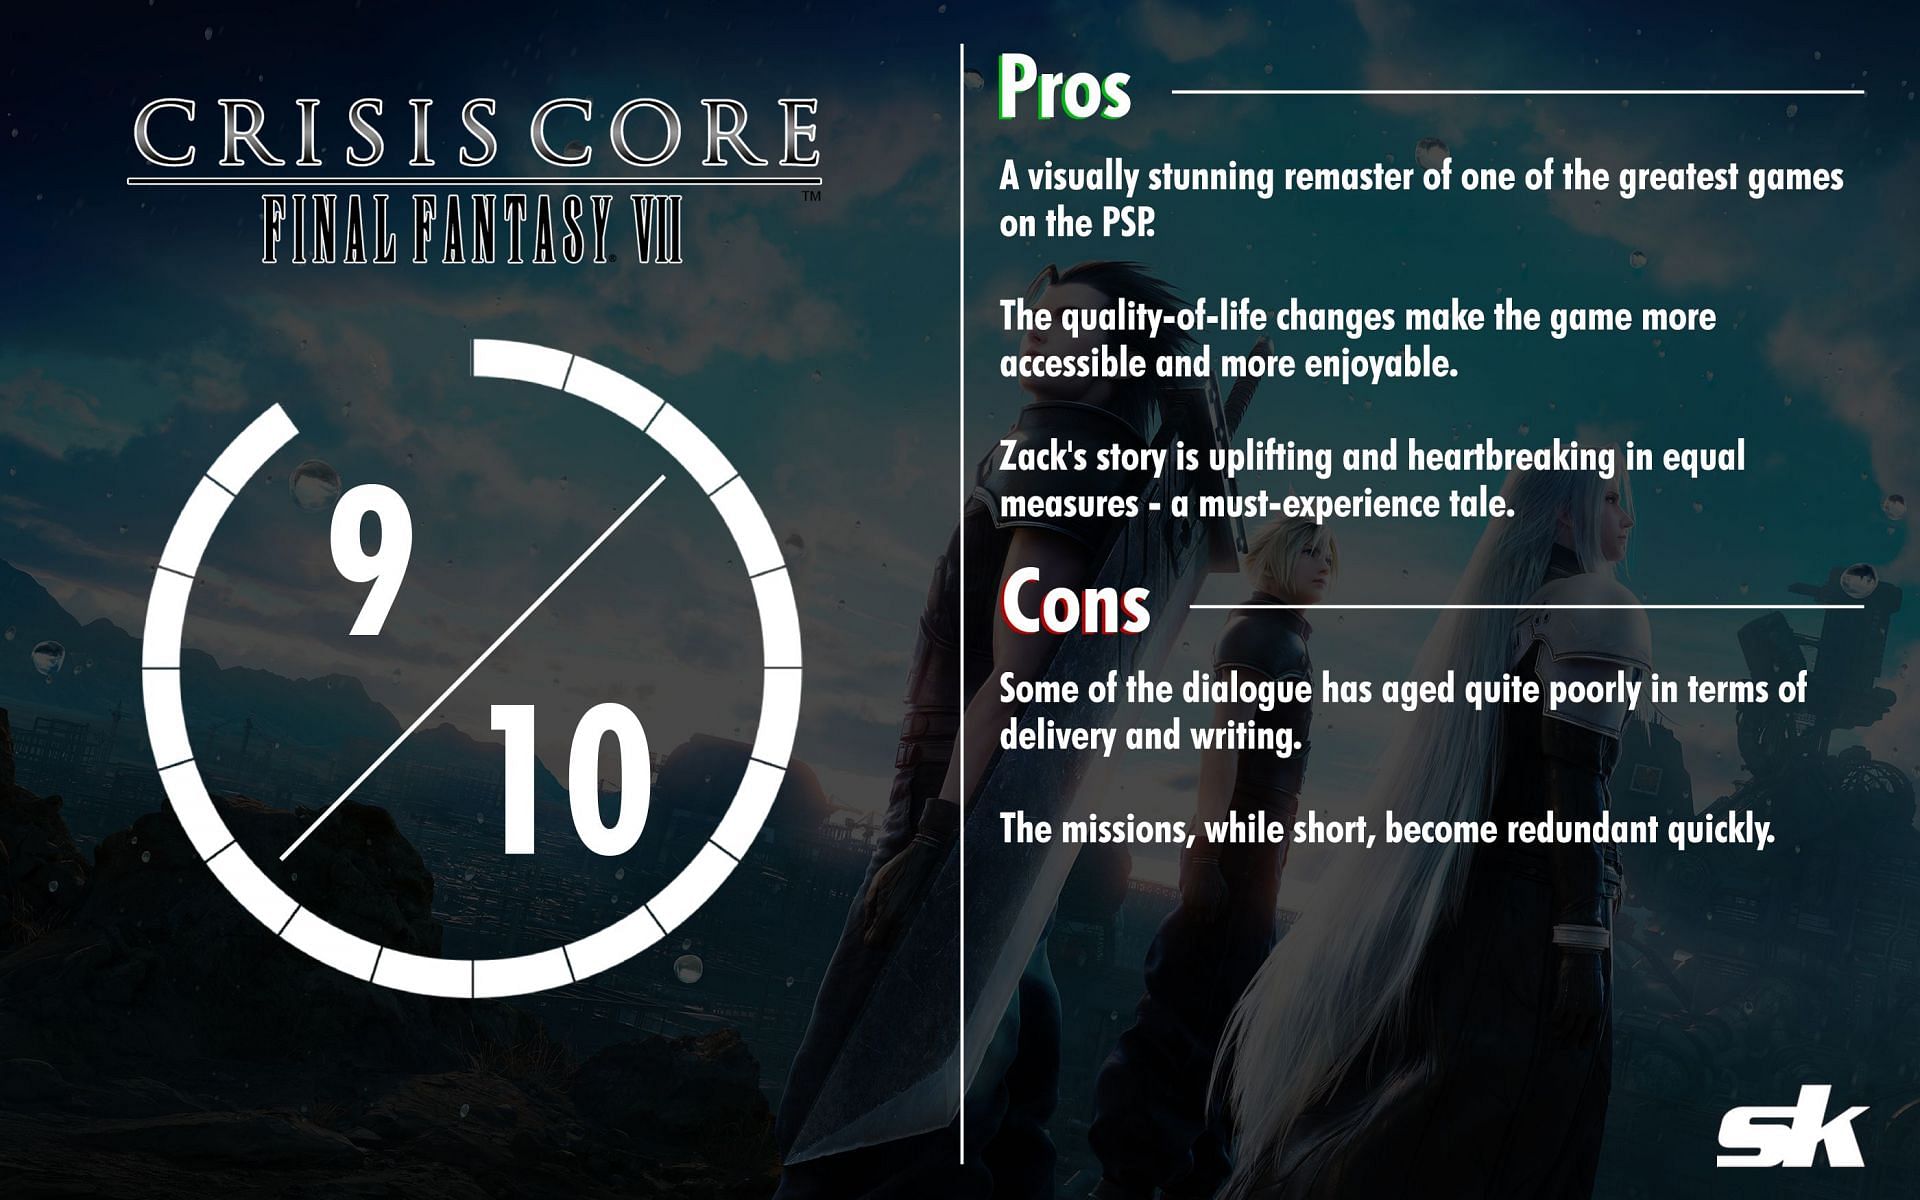 For better or worse, Crisis Core -Final Fantasy VII- Reunion is 100% true to the original game (Image via Sportskeeda)